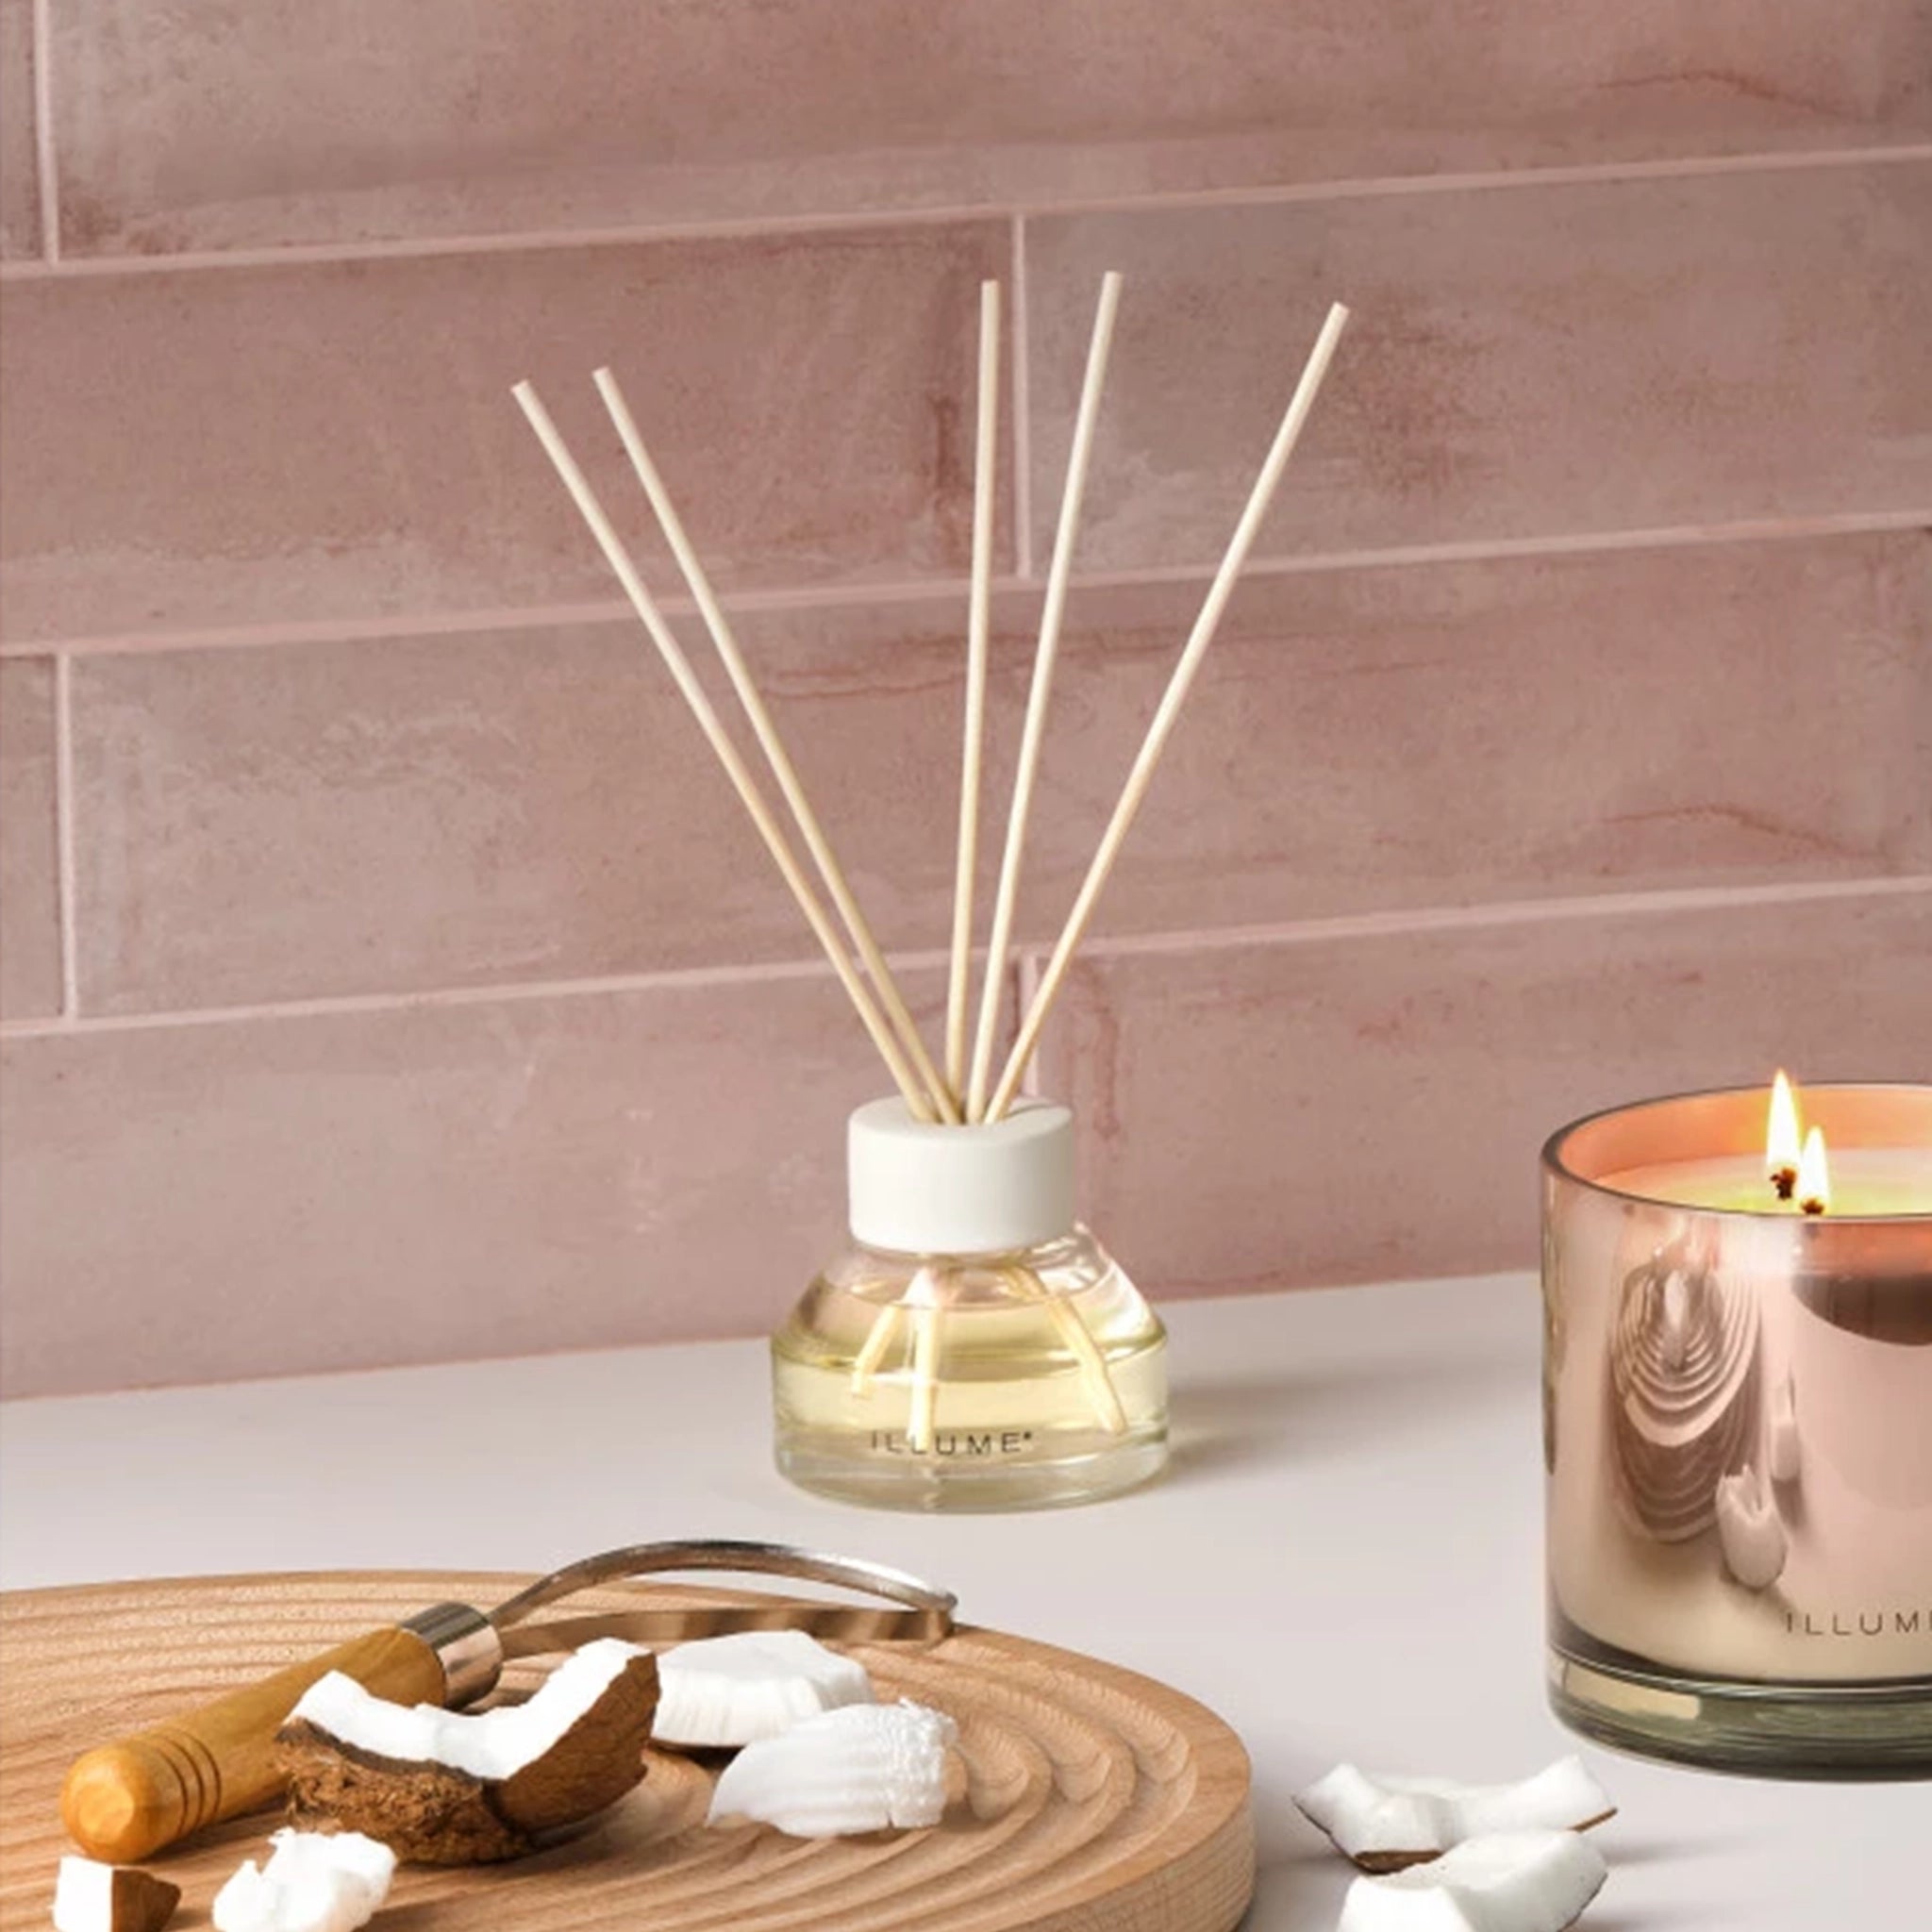 A oil diffuser with a clear glass filled with scented oil a clean cream colored lid and five neutral wood reeds stemming out from the top.